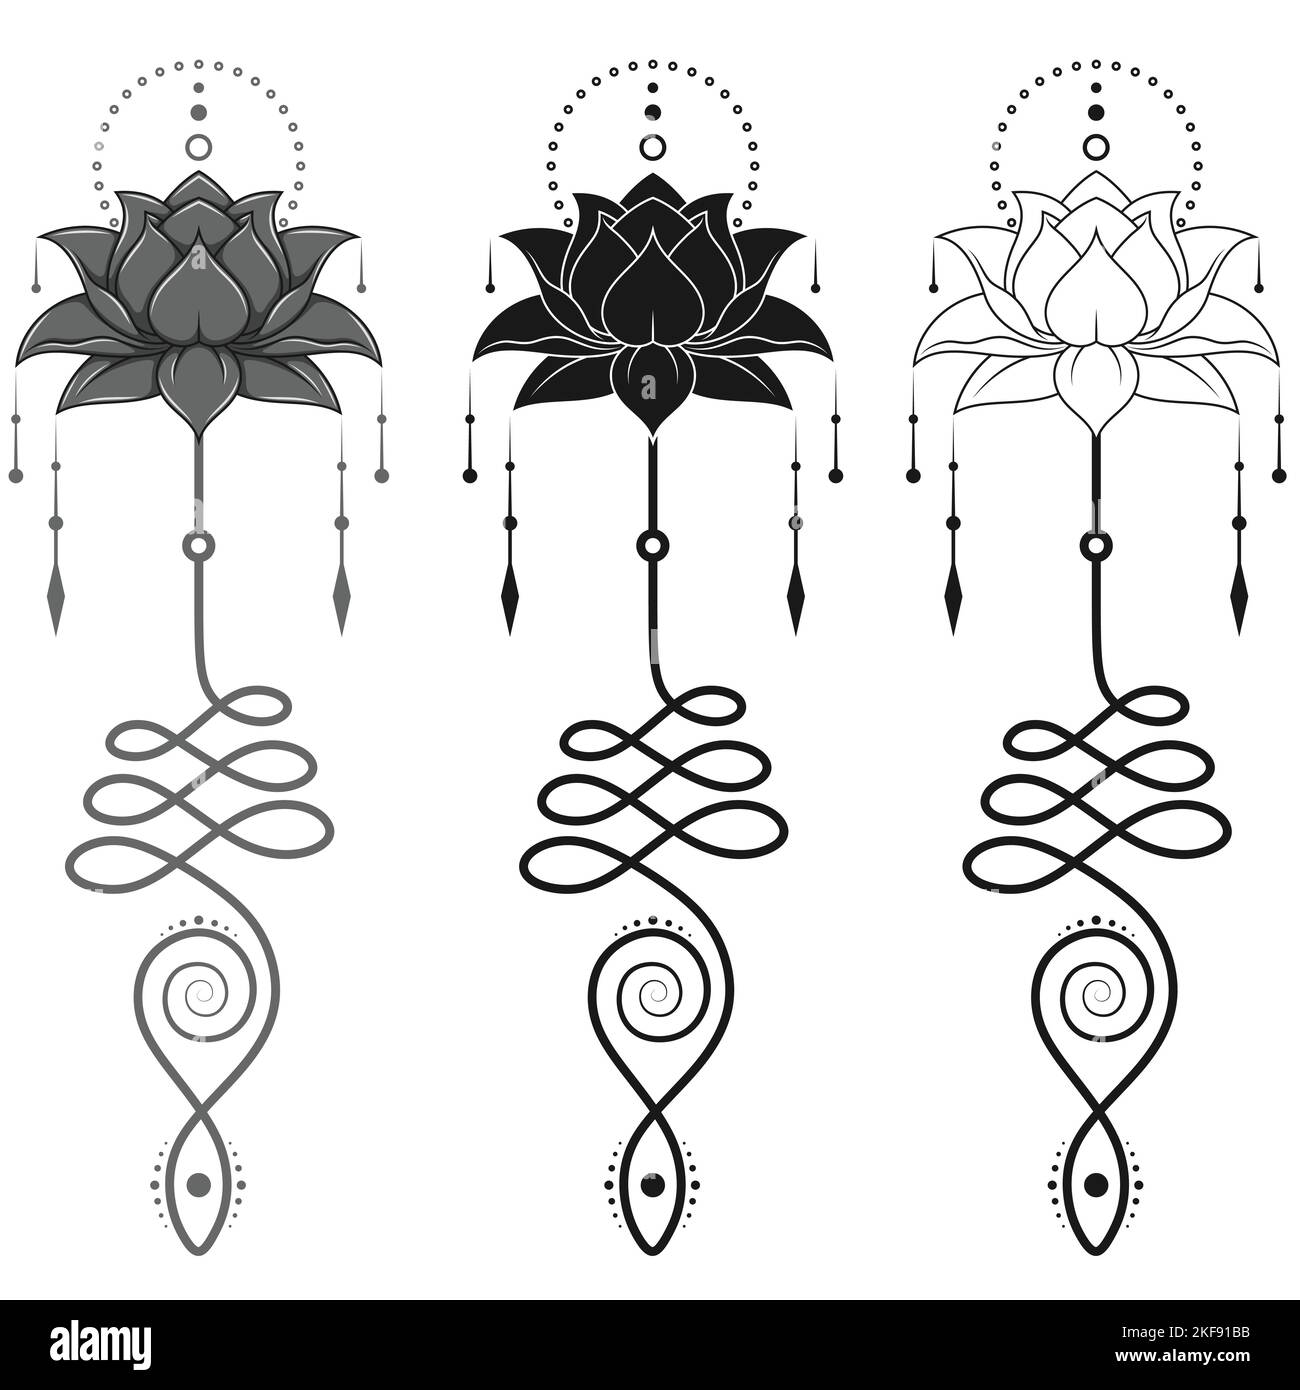 Lotus Flower Vector Design with Unalome hindu symbol, yoga and induism symbol, lotus flower motifs for tattoo Stock Vector